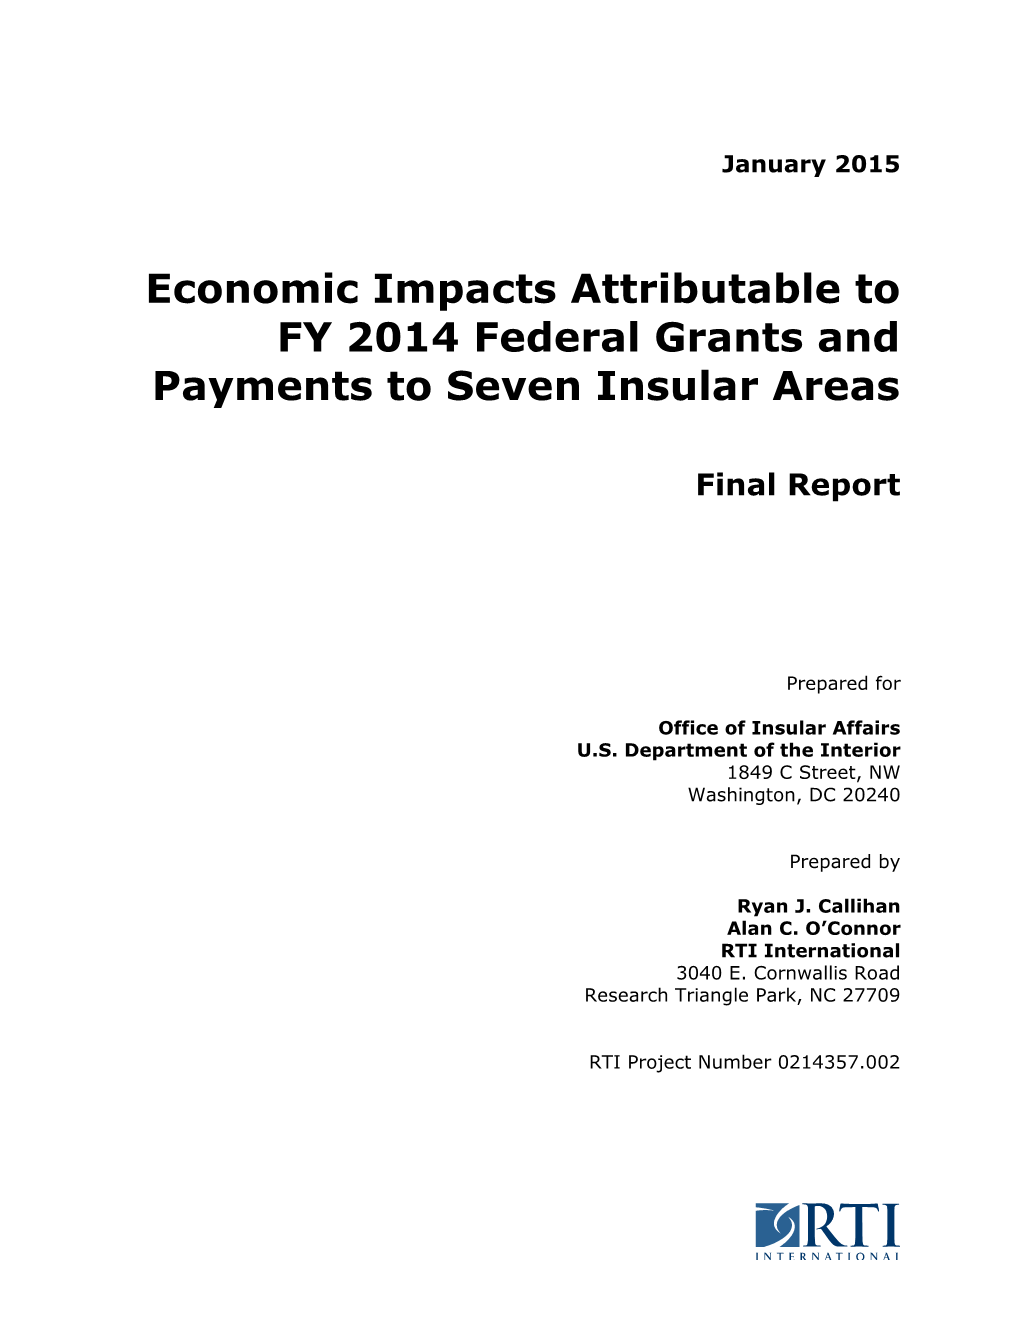 Economic Impacts Attributable to FY 2014 Federal Grants and Payments to Seven Insular Areas